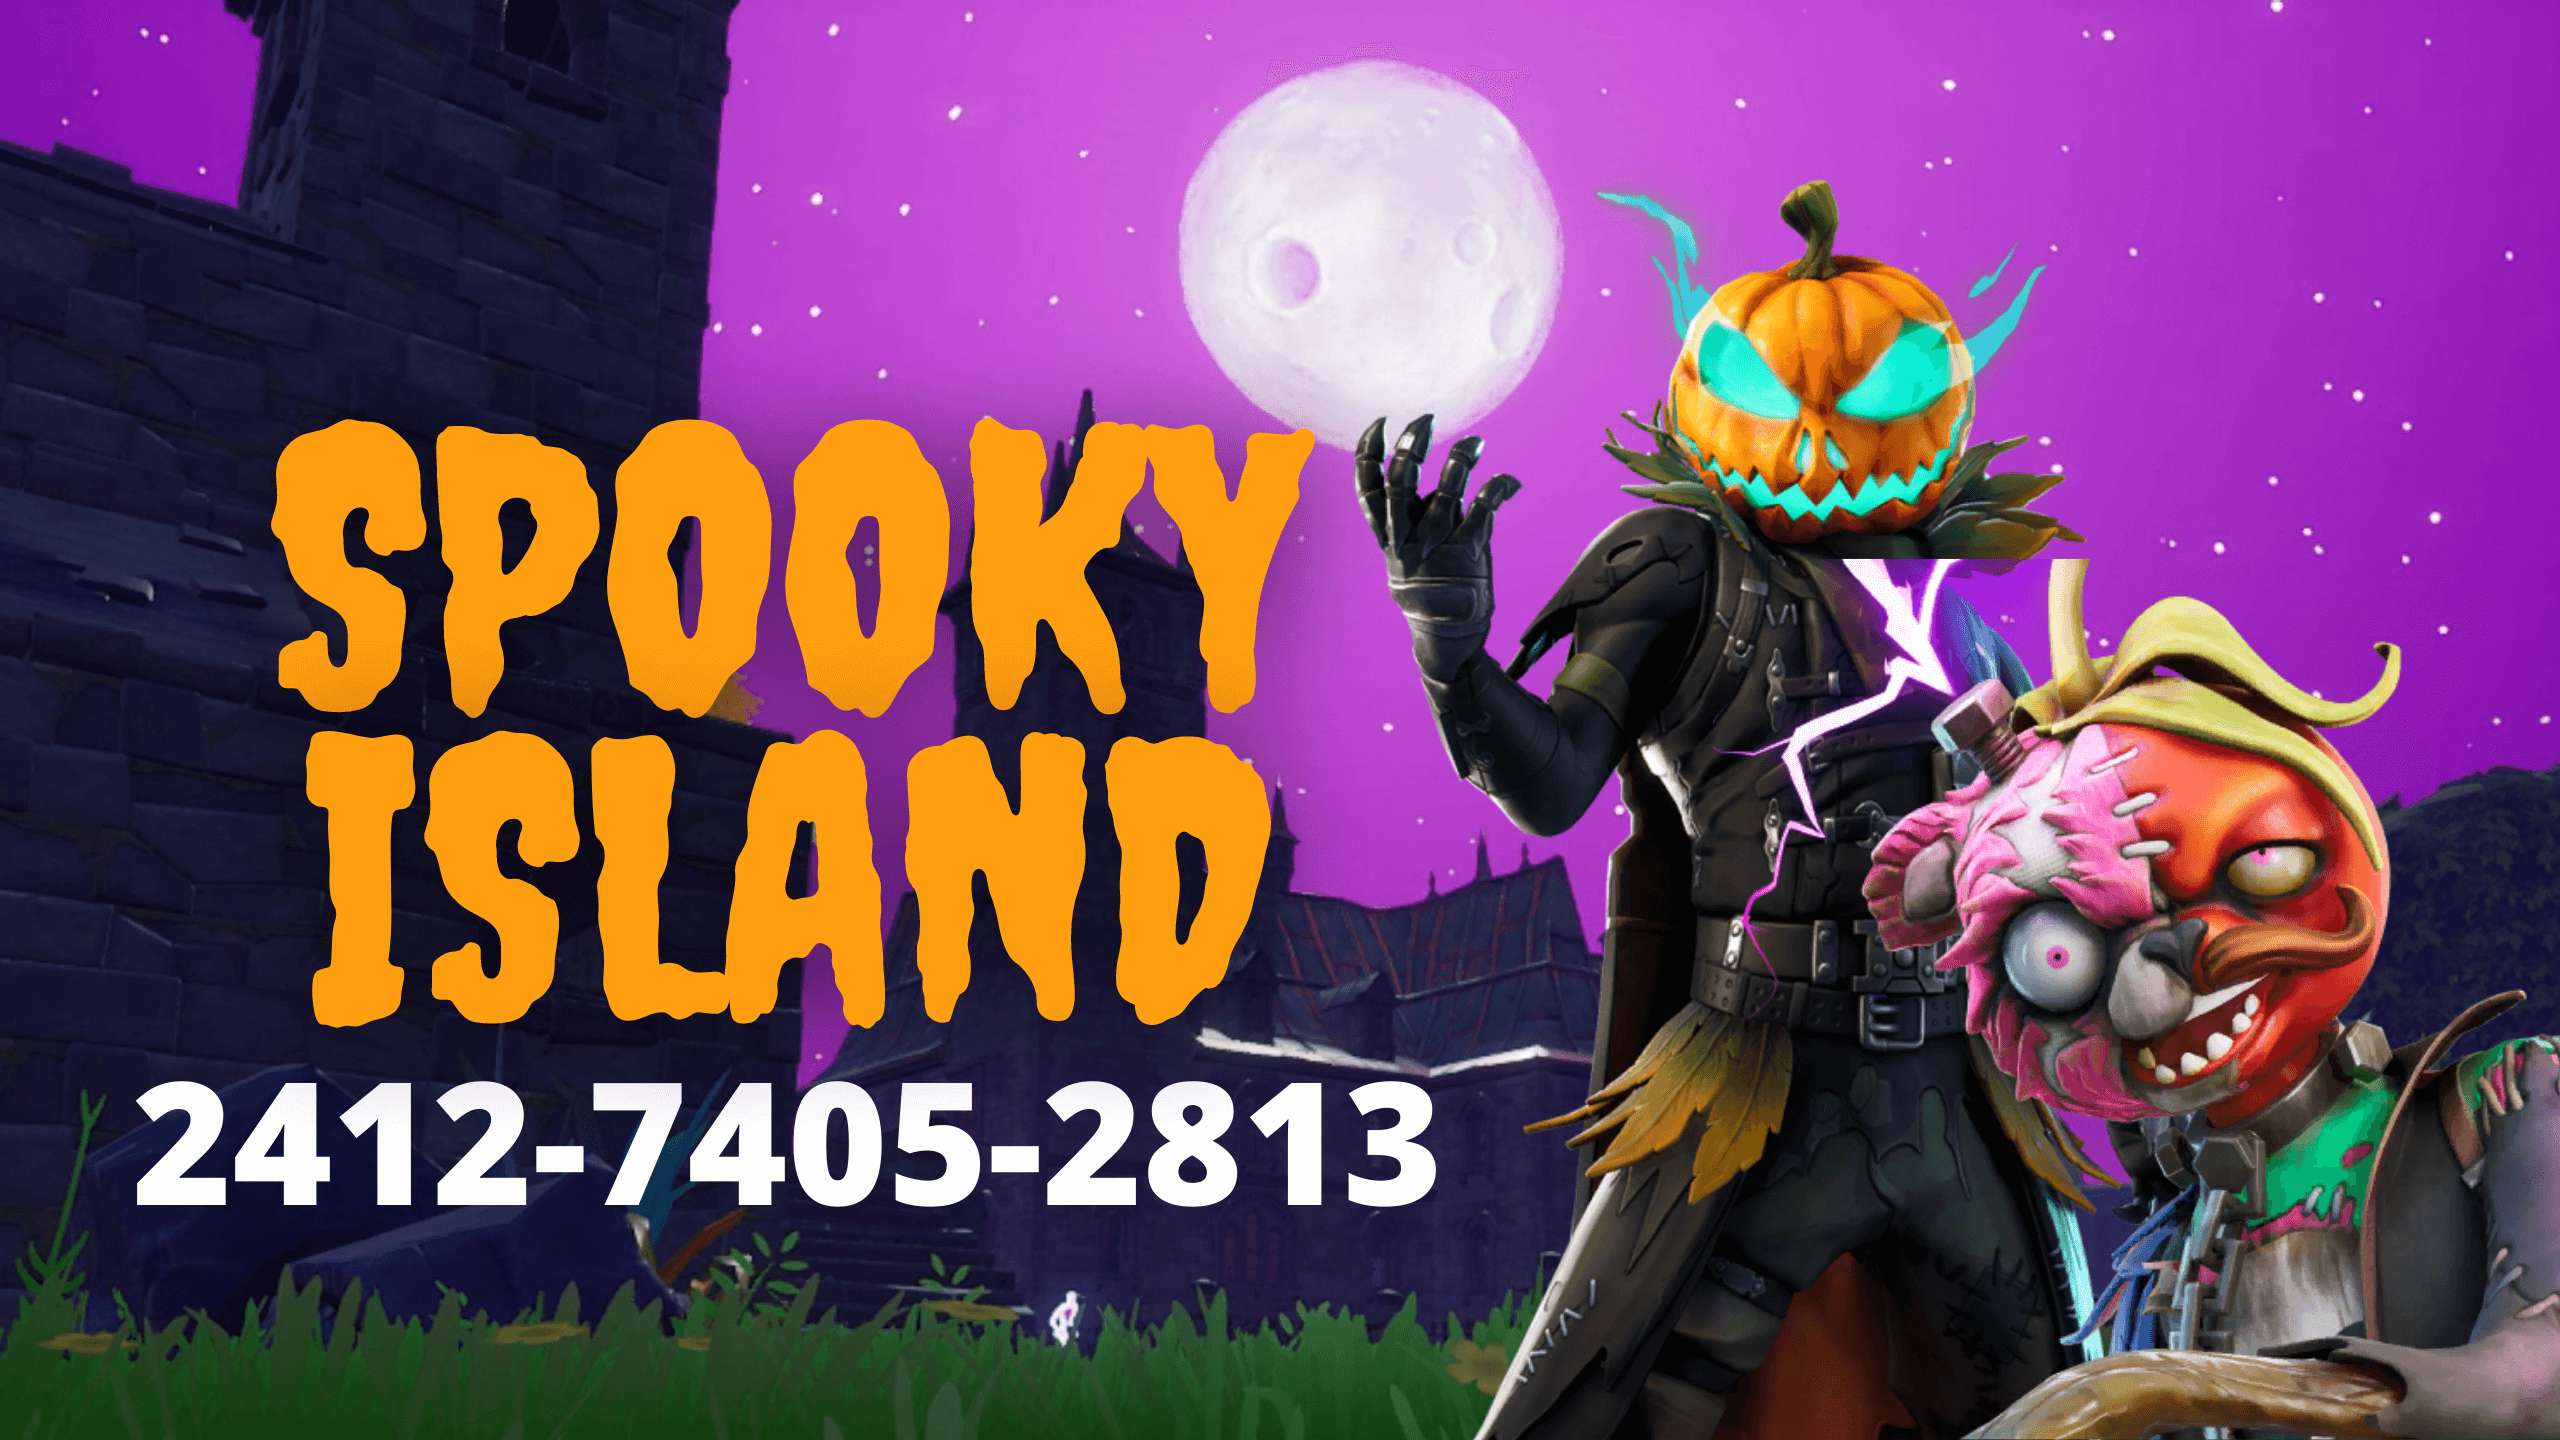 SPOOKY FREE-FOR-ALL ISLAND